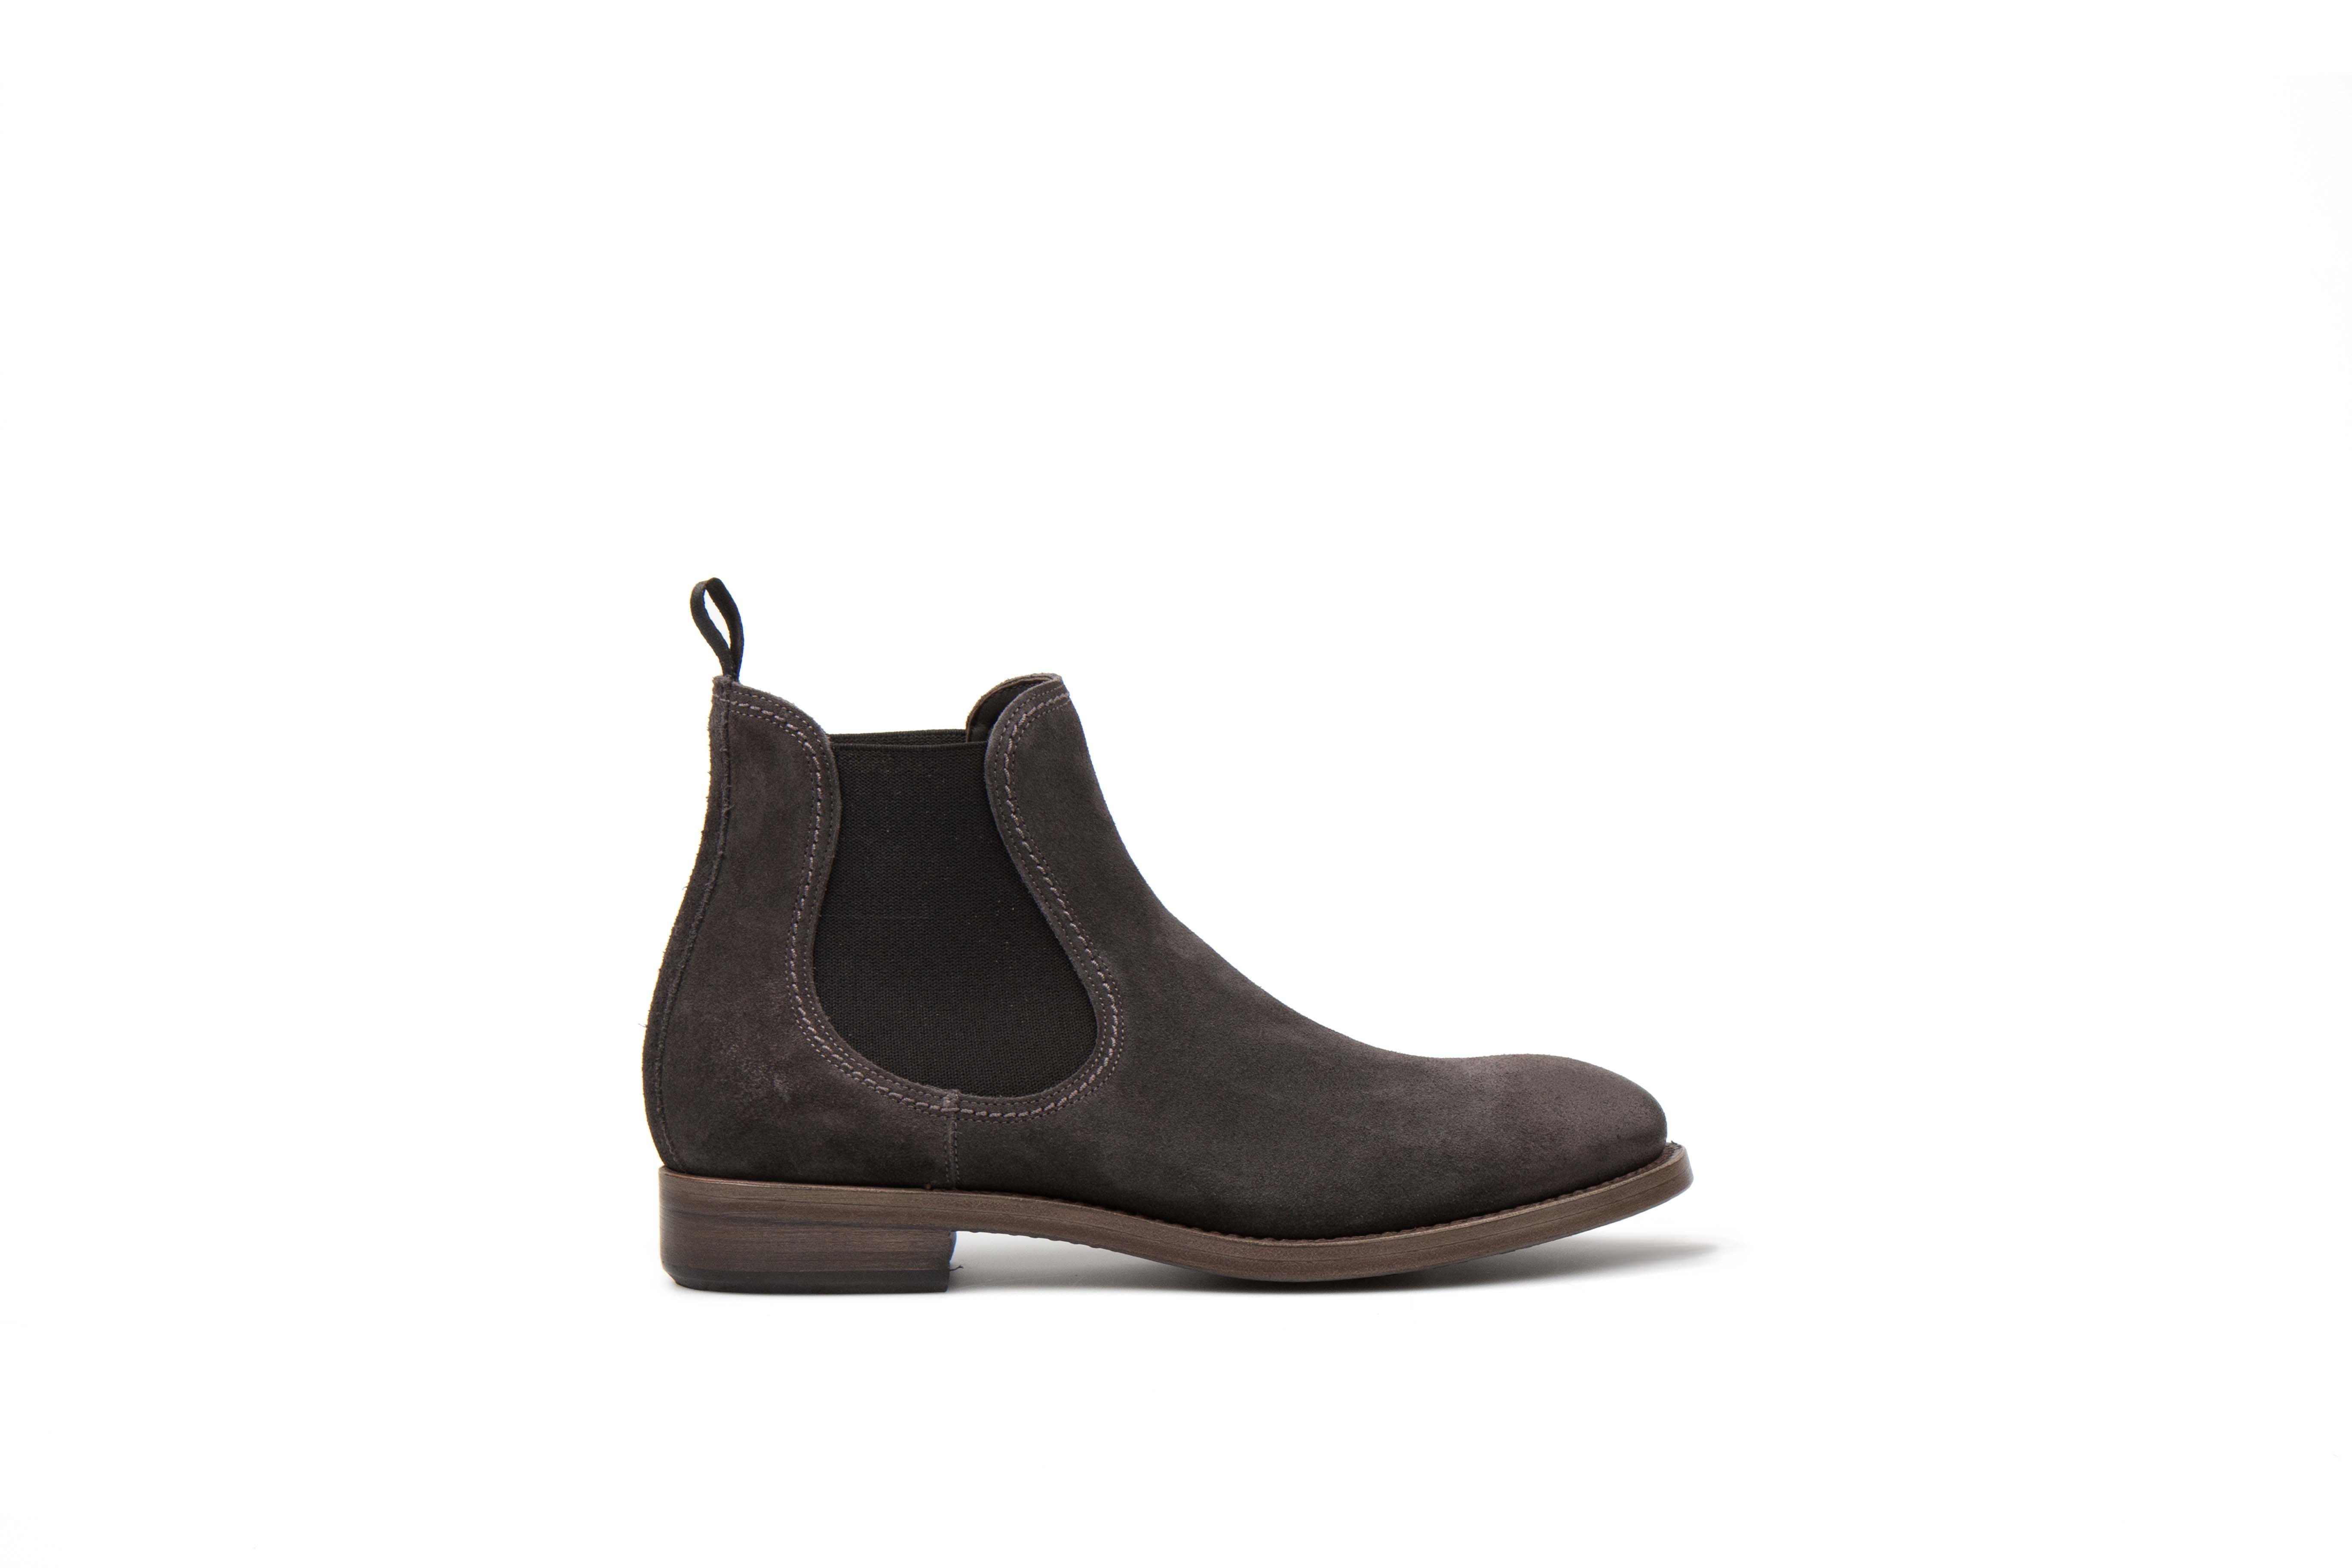 Hanoi Antracite Suede Leather Chelsea Boots